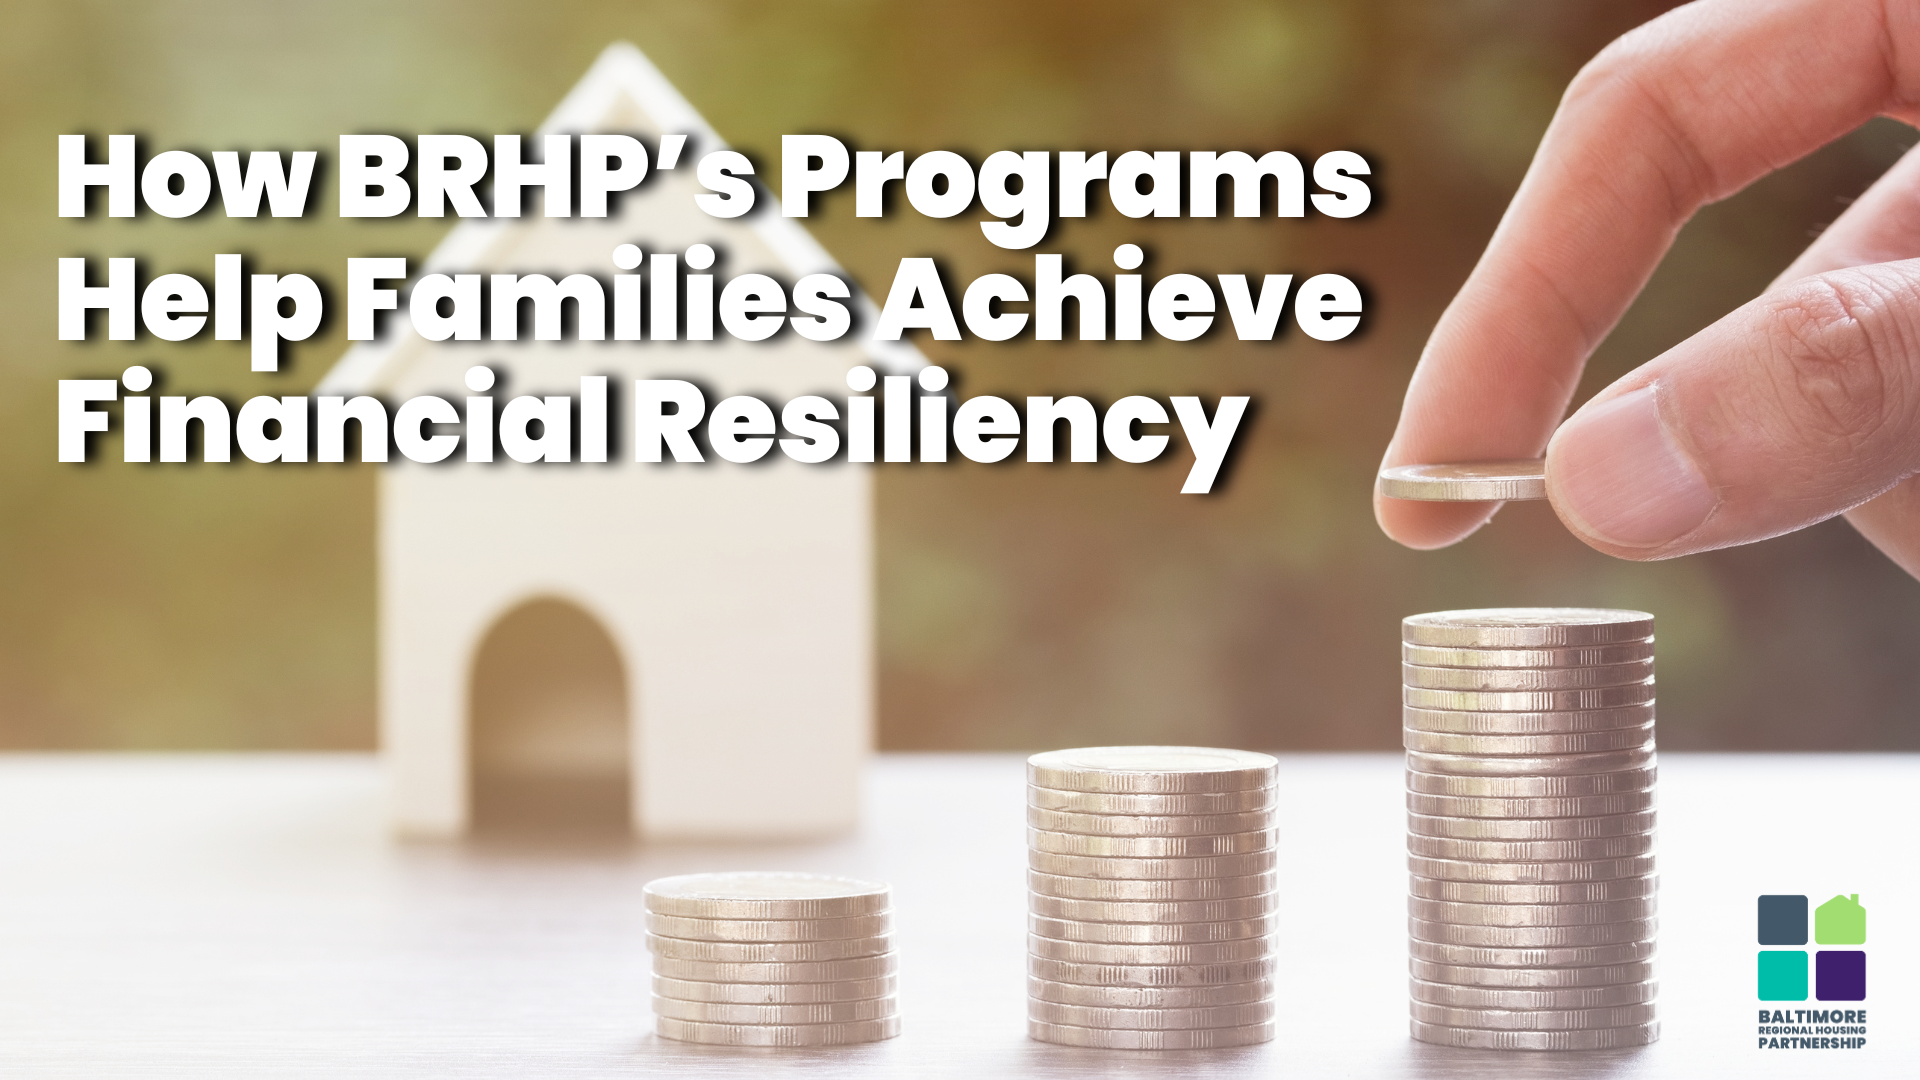 How BRHP’s Programs Help Families Achieve Financial Resiliency 